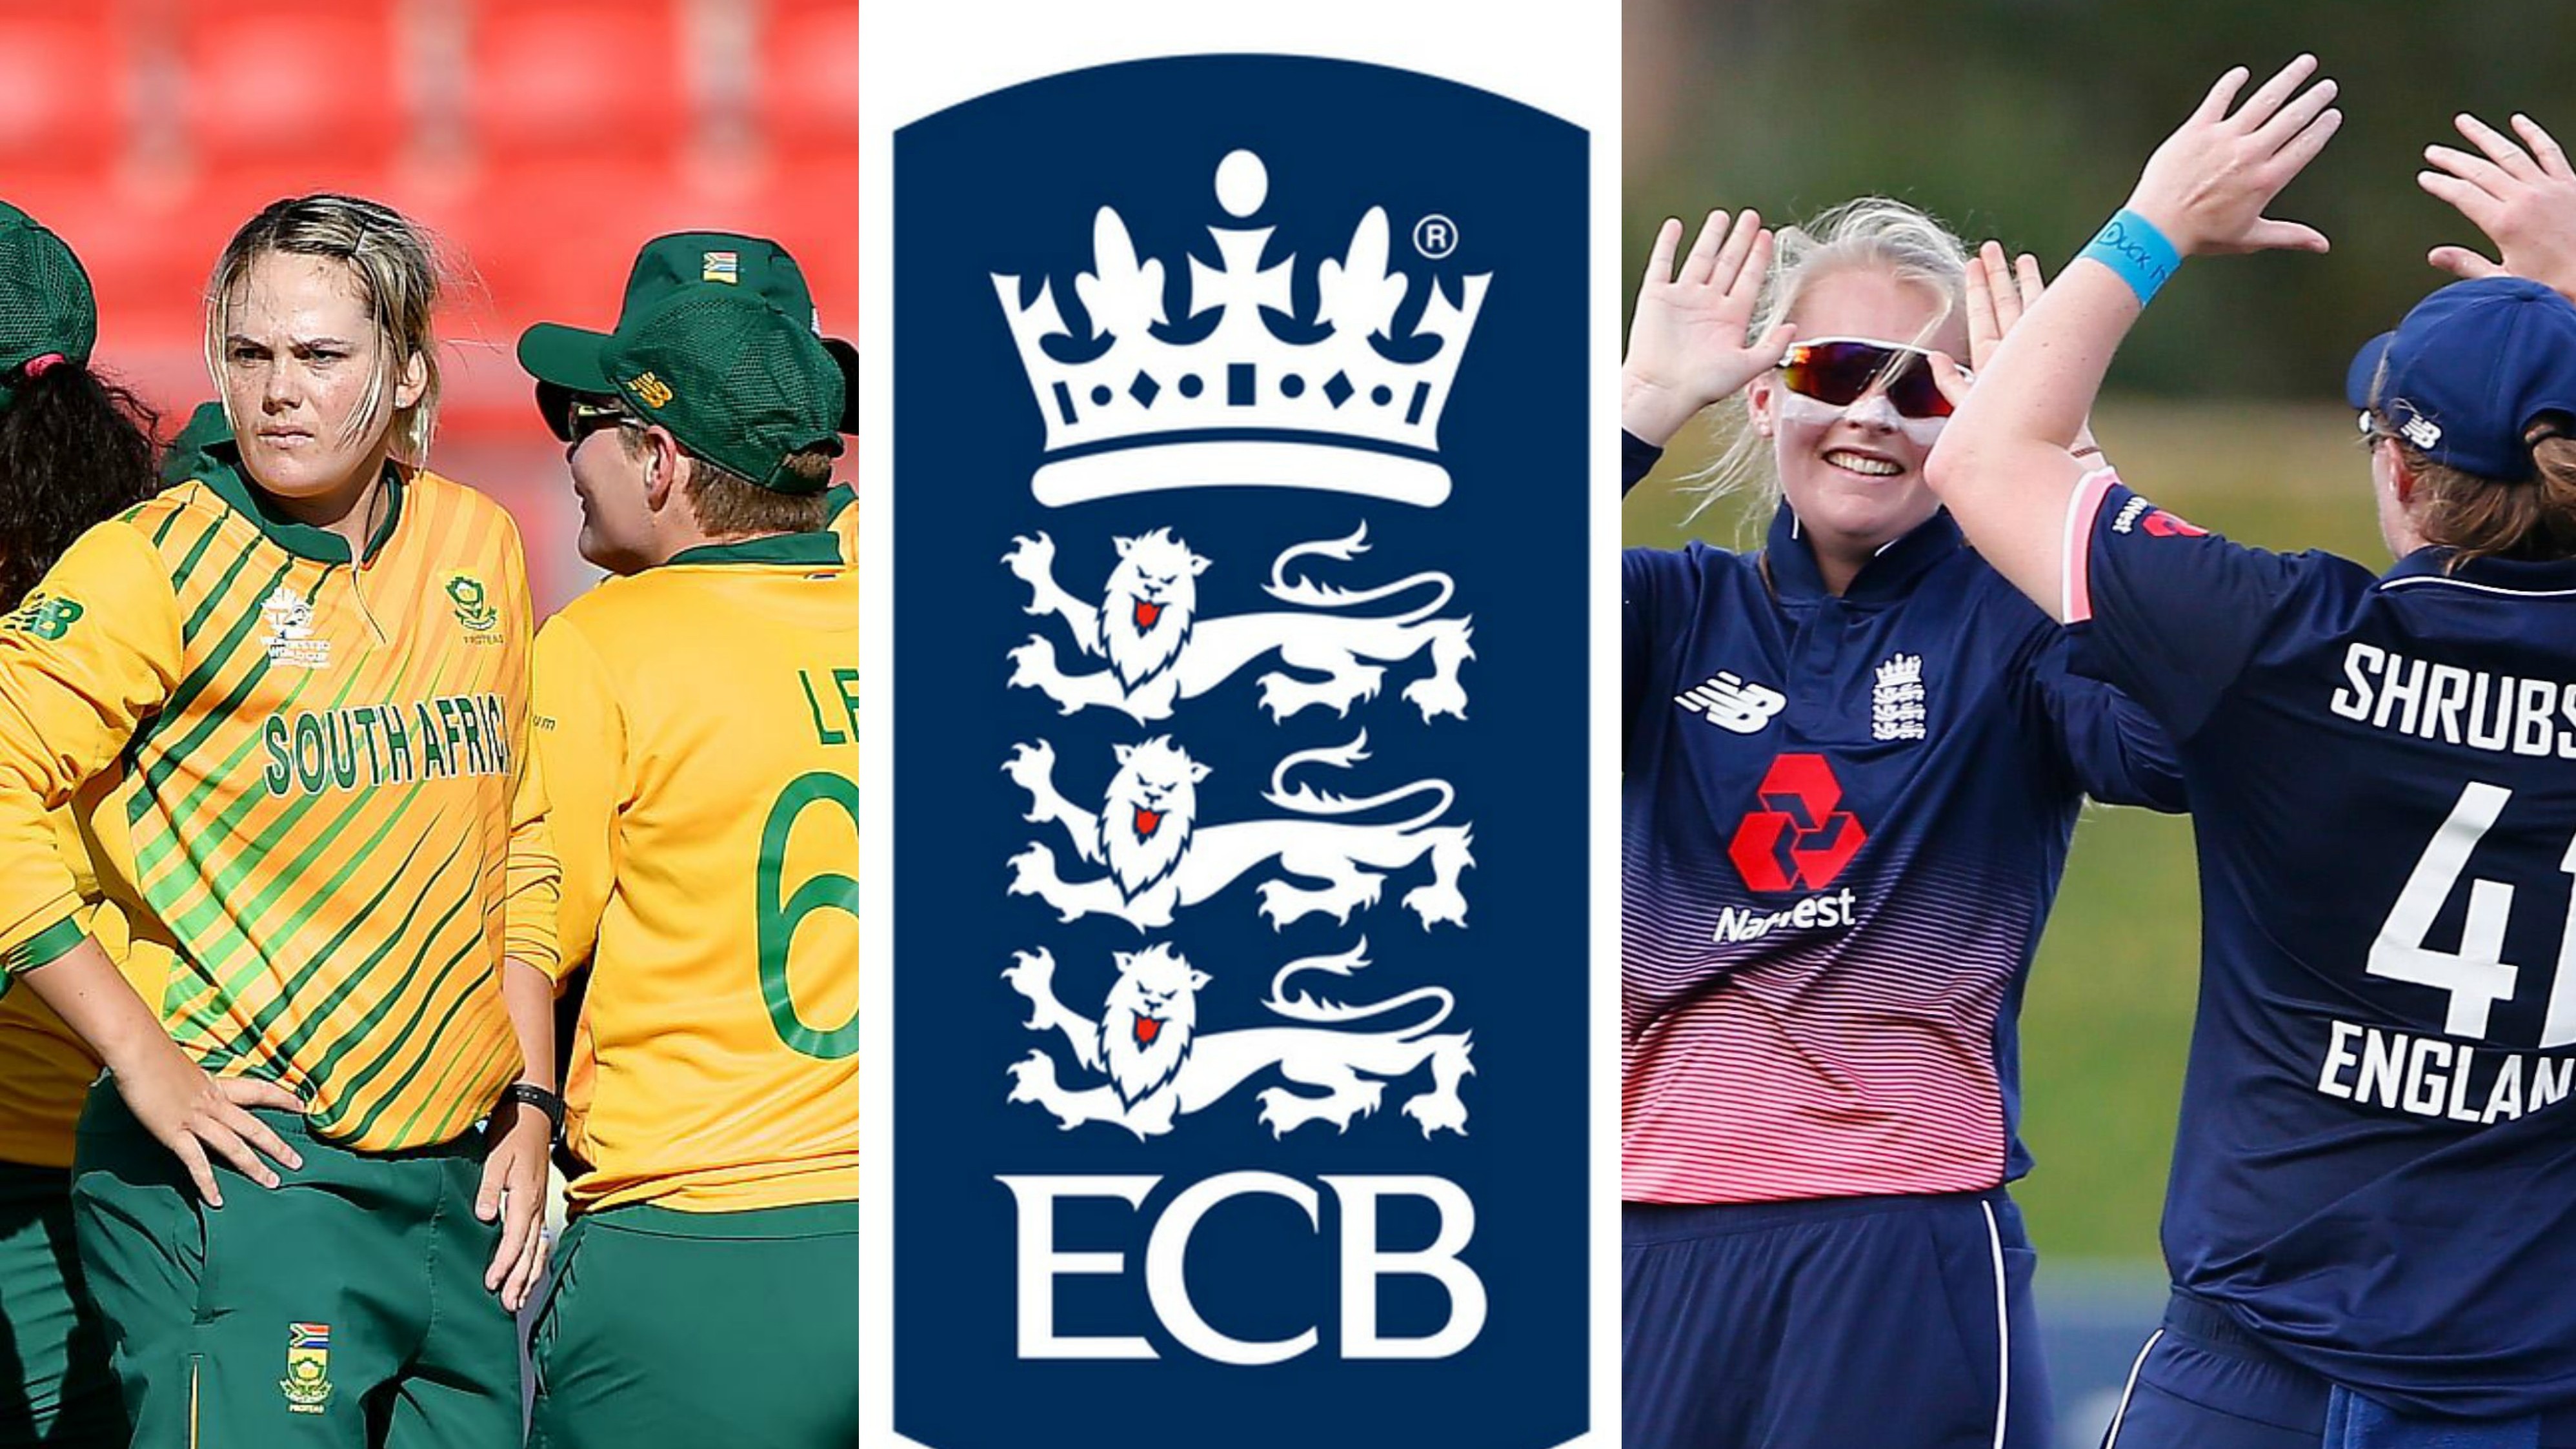 ECB remains committed to hosting women's cricket in 2020 despite South Africa's withdrawal